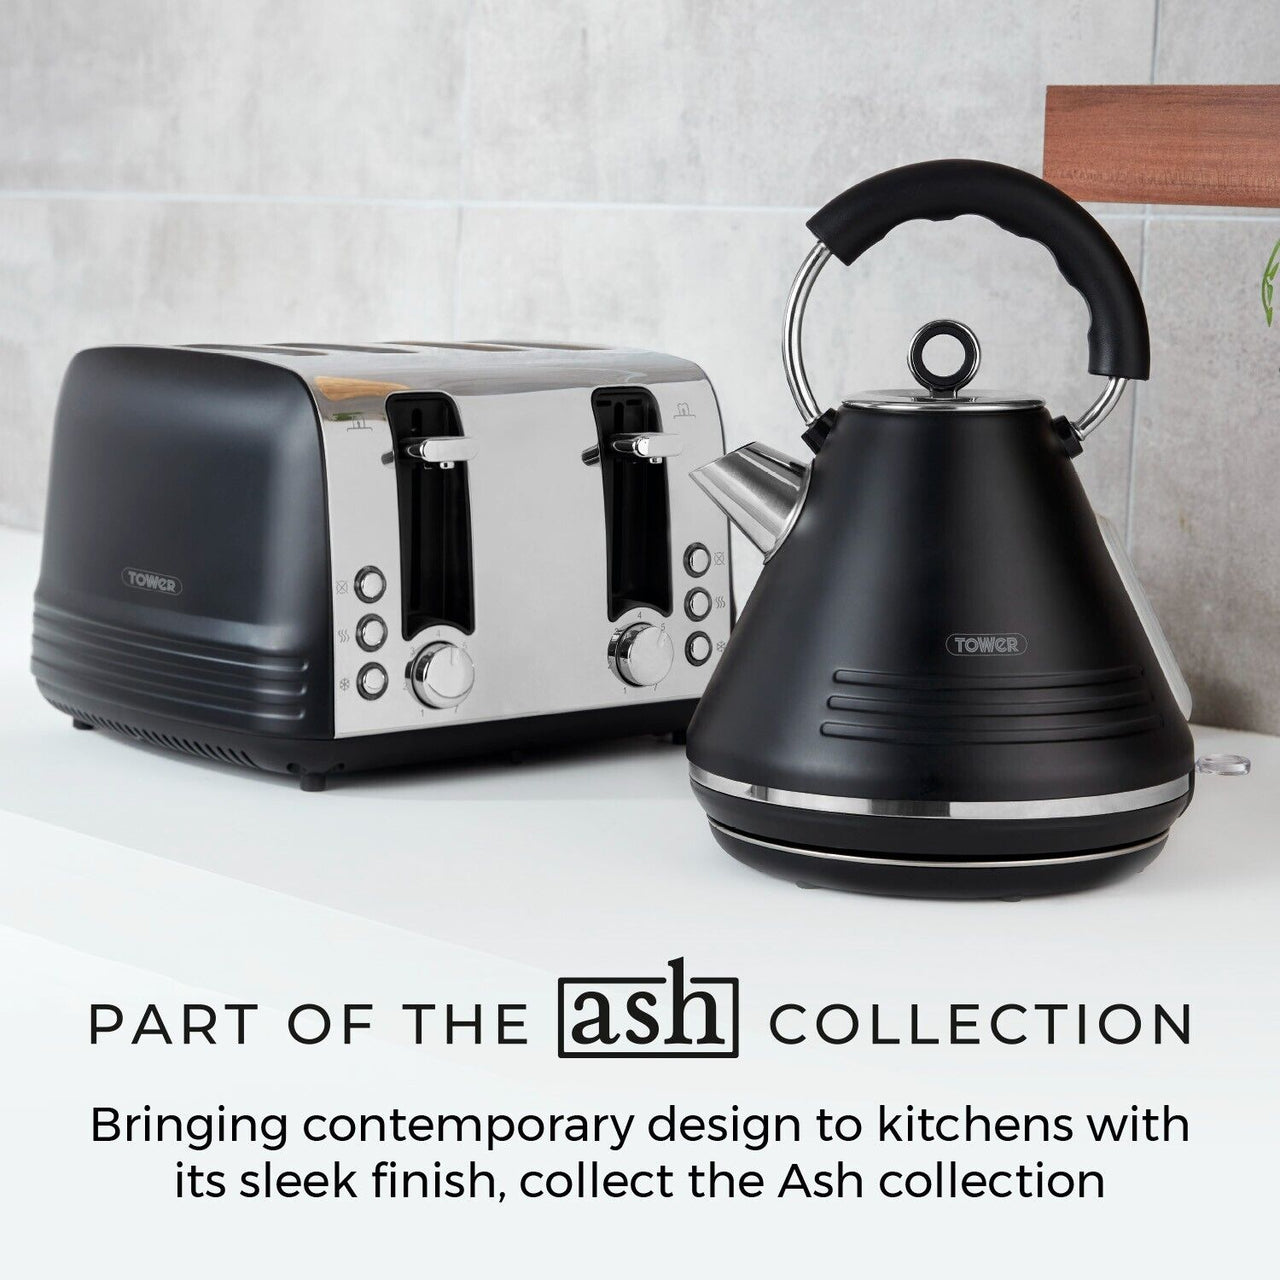 Tower Ash Black 1.7L 3KW Pyramid Kettle, 4 Slice Toaster & T24042BLK Manual Microwave Matching Set